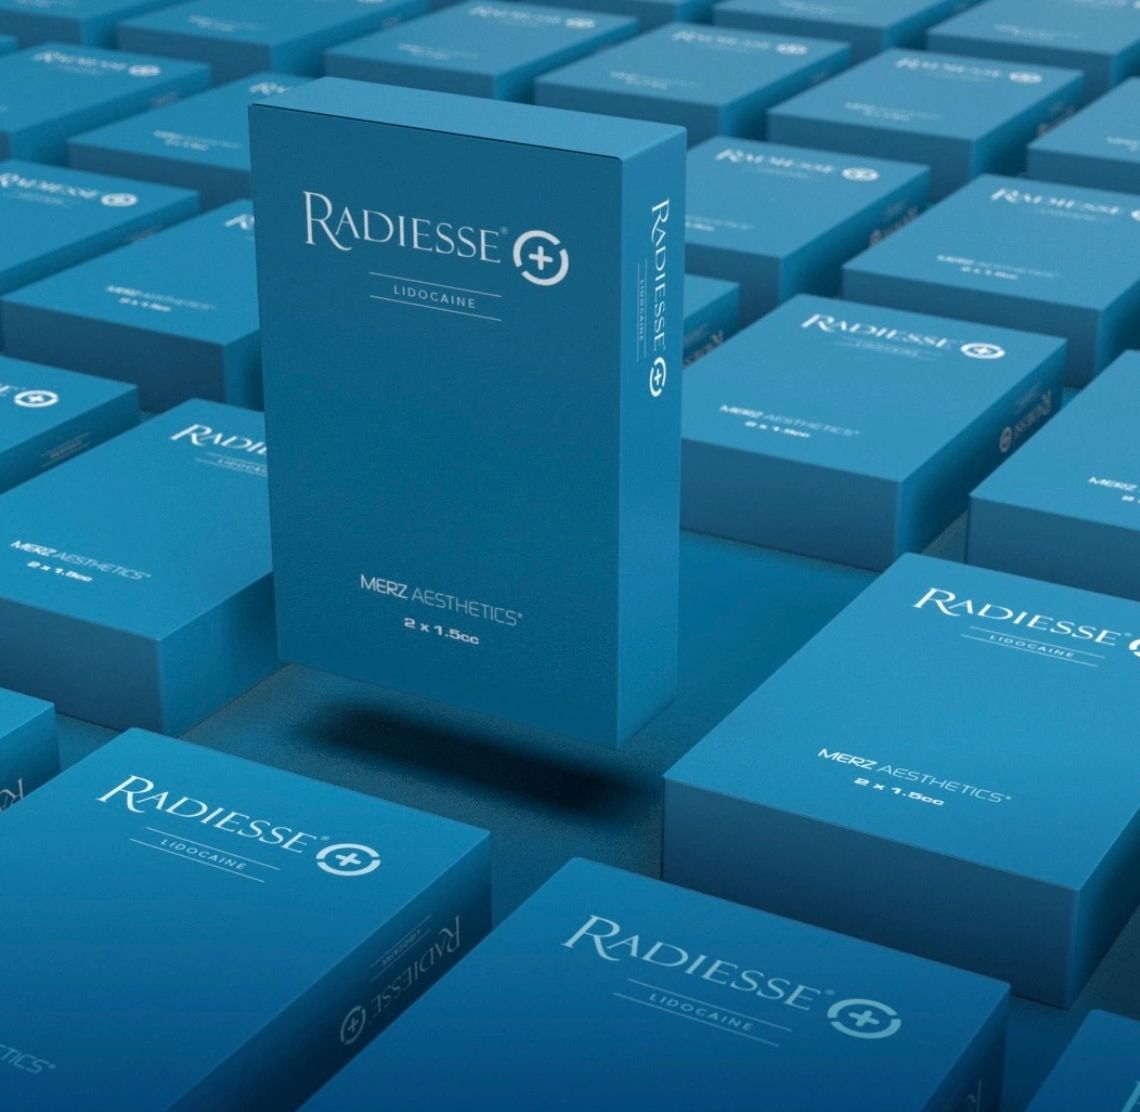 RADIESSE (+) adds volume by helping to smooth moderate to severe facial wrinkles and folds.